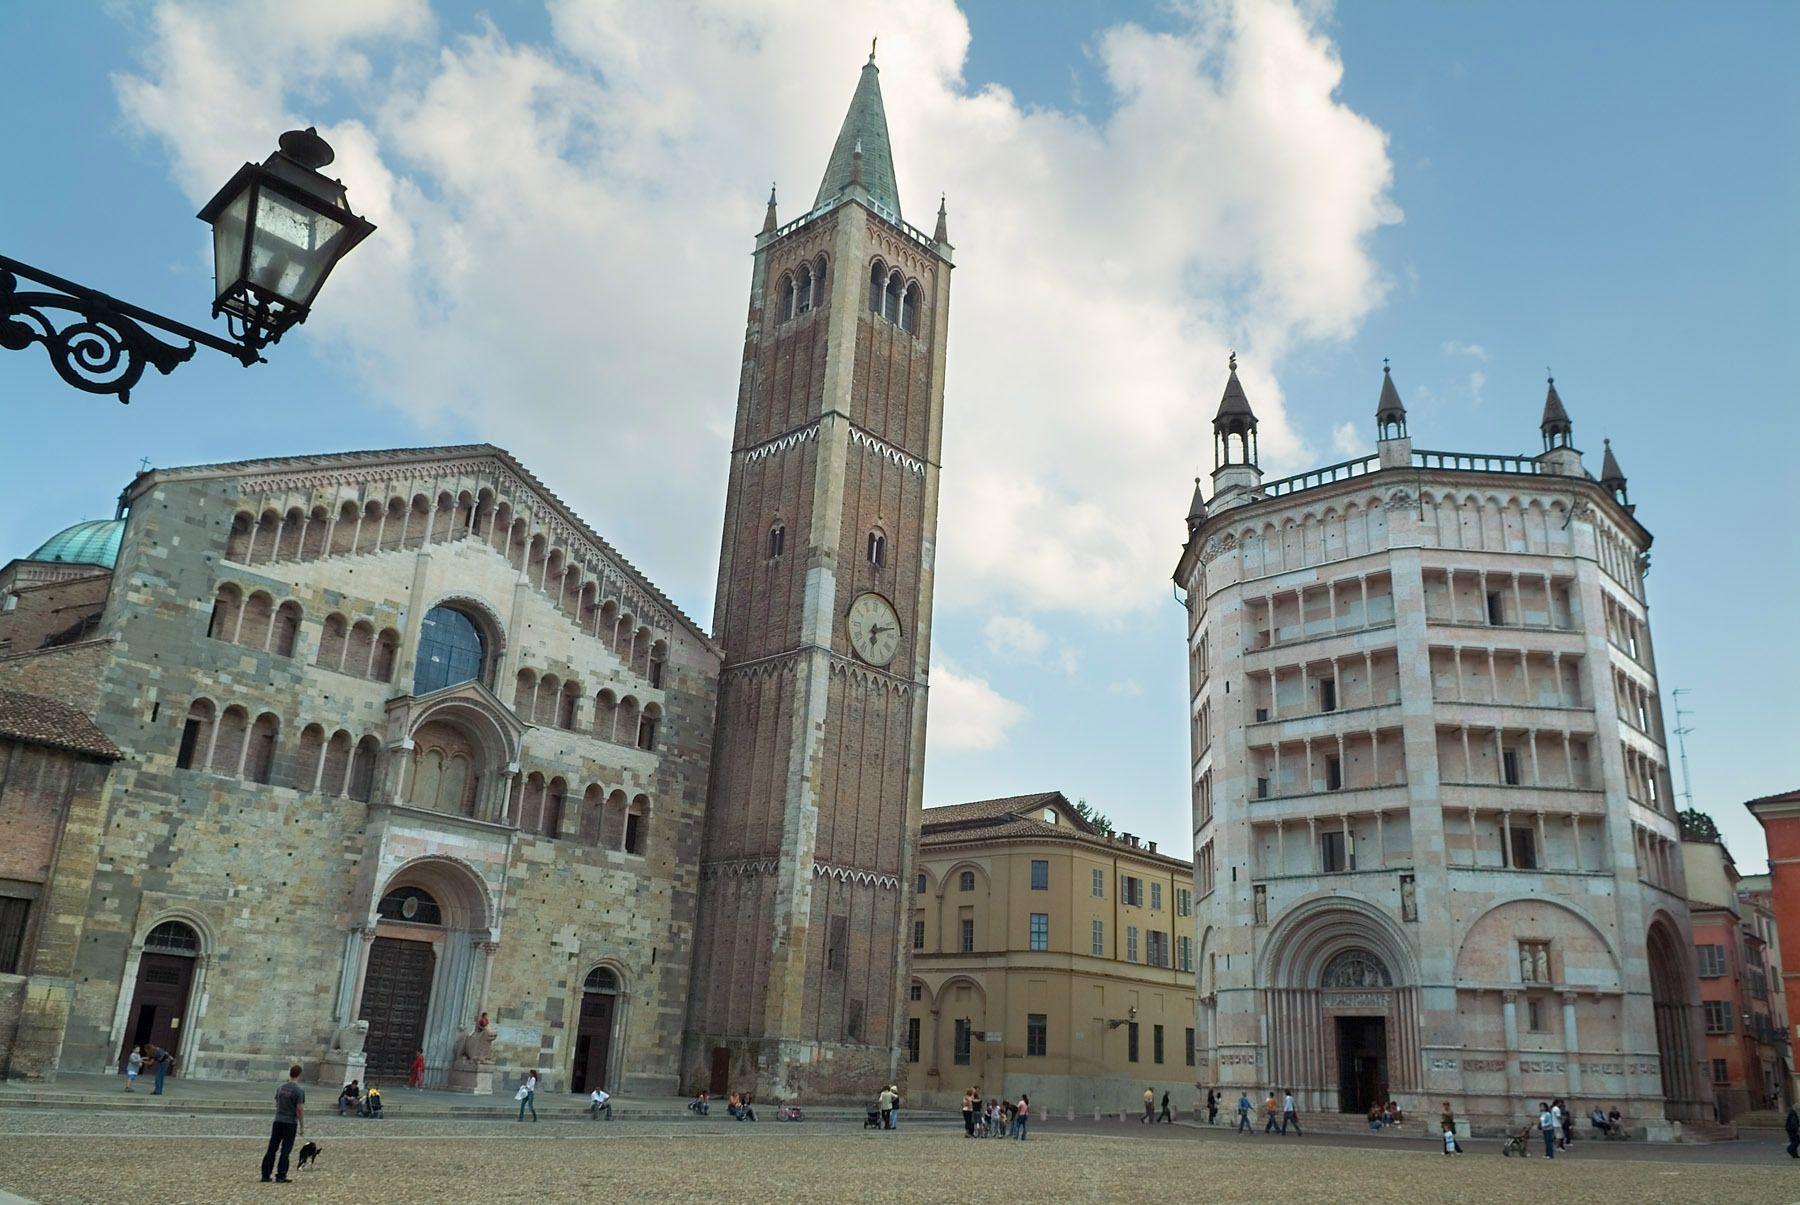 Clock tower in Parma, Italy wallpaper and image